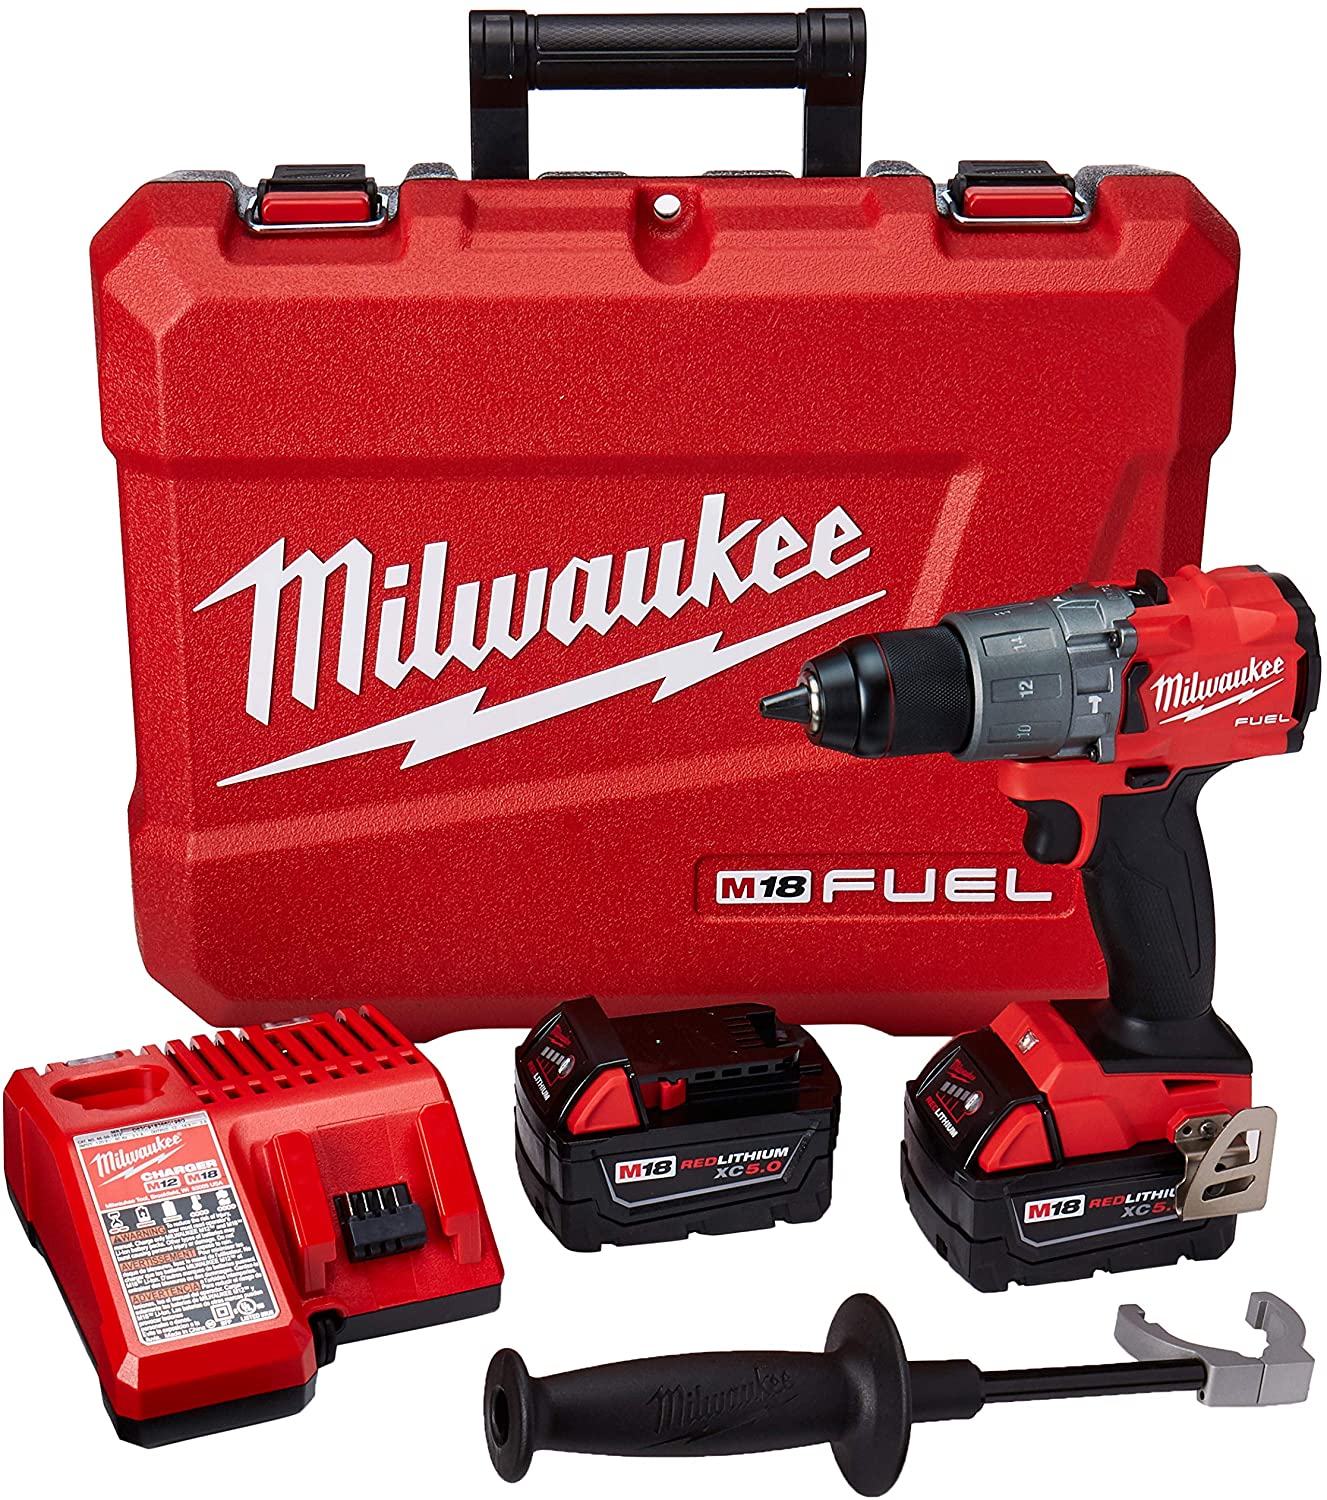 MILWAUKEE'S Electric Tools 2804-22 Hammer Drill Kit